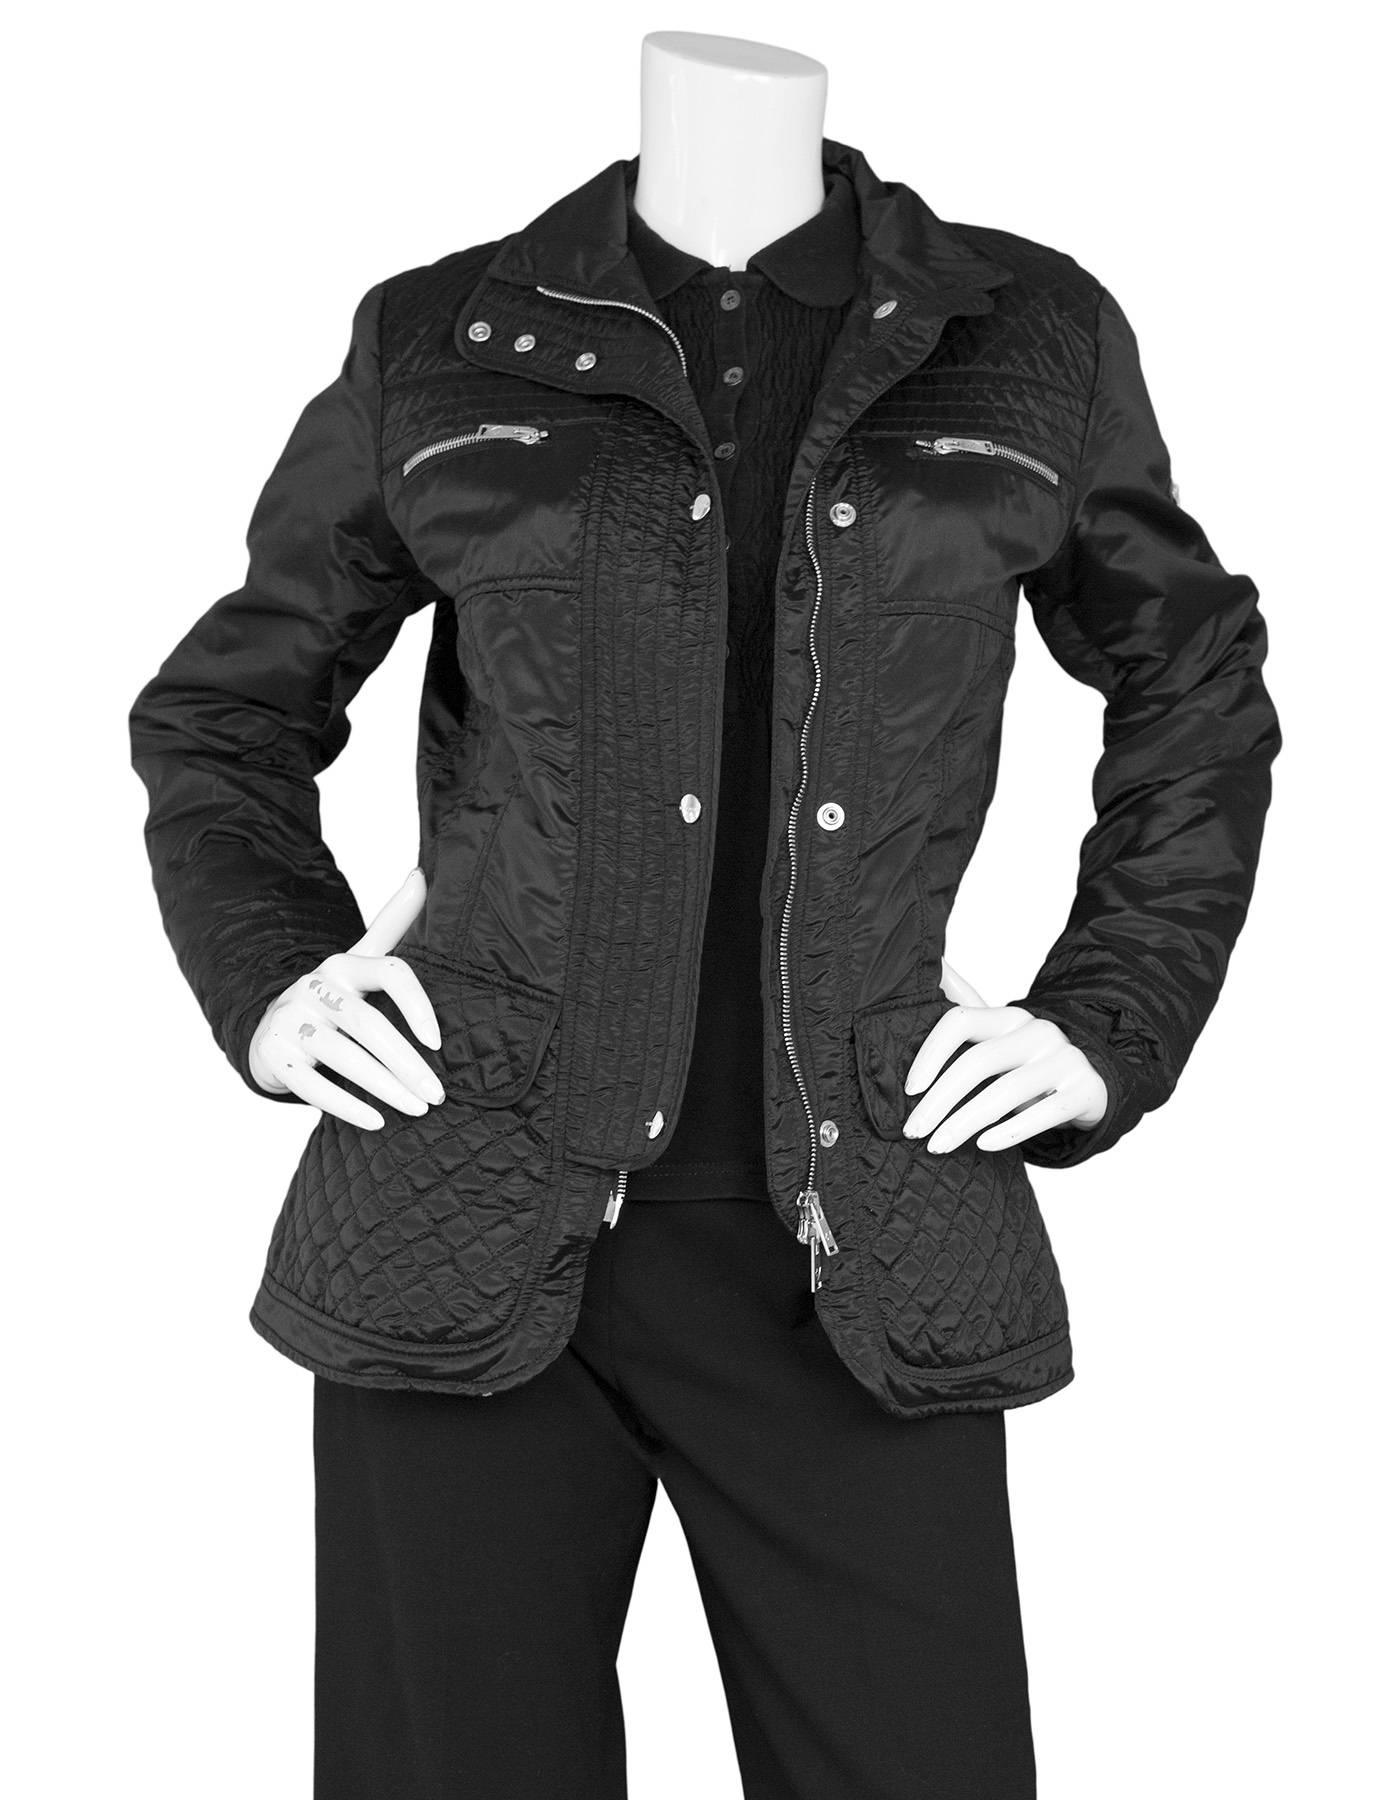 Postcard Black Nylon Quilted Jacket 

Made In: Romania
Color: Black
Composition: Polyamide
Lining: Black, 100% polyamide
Closure/Opening: Double zip up closure
Exterior Pockets: Two flap pockets and two zipper pockets
Interior Pockets: None
Overall